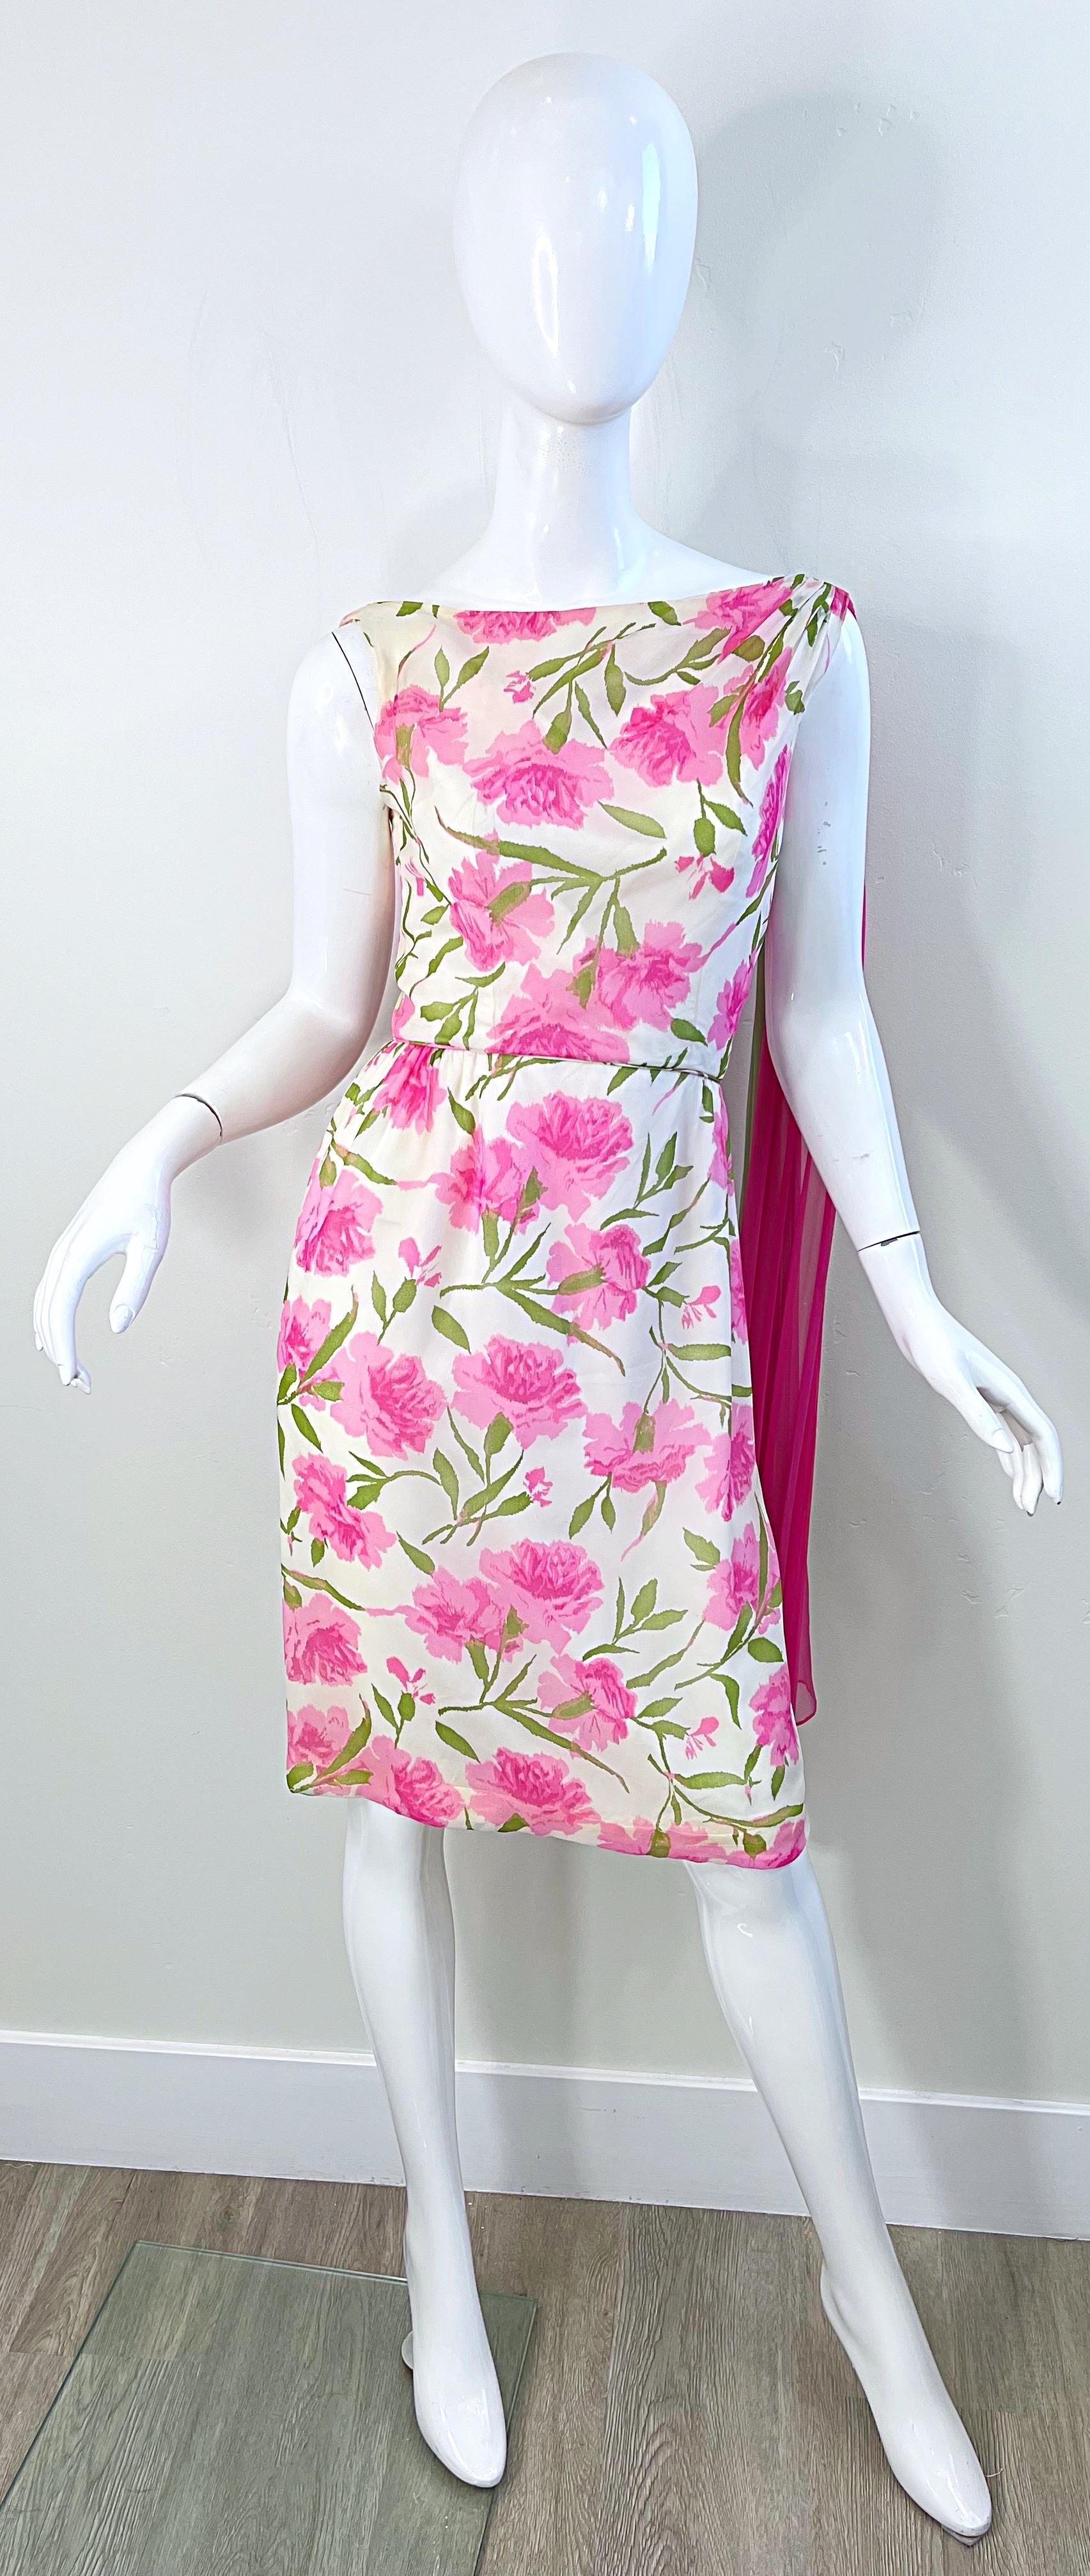 Beautiful early 60s Demi couture silk chiffon dress ! Features flowers printed in pink and green throughout. Two layer of swag drape over the left shoulder. Tailored bodice with full metal zipper up the back and hook-and-eye closure. Perfect for any